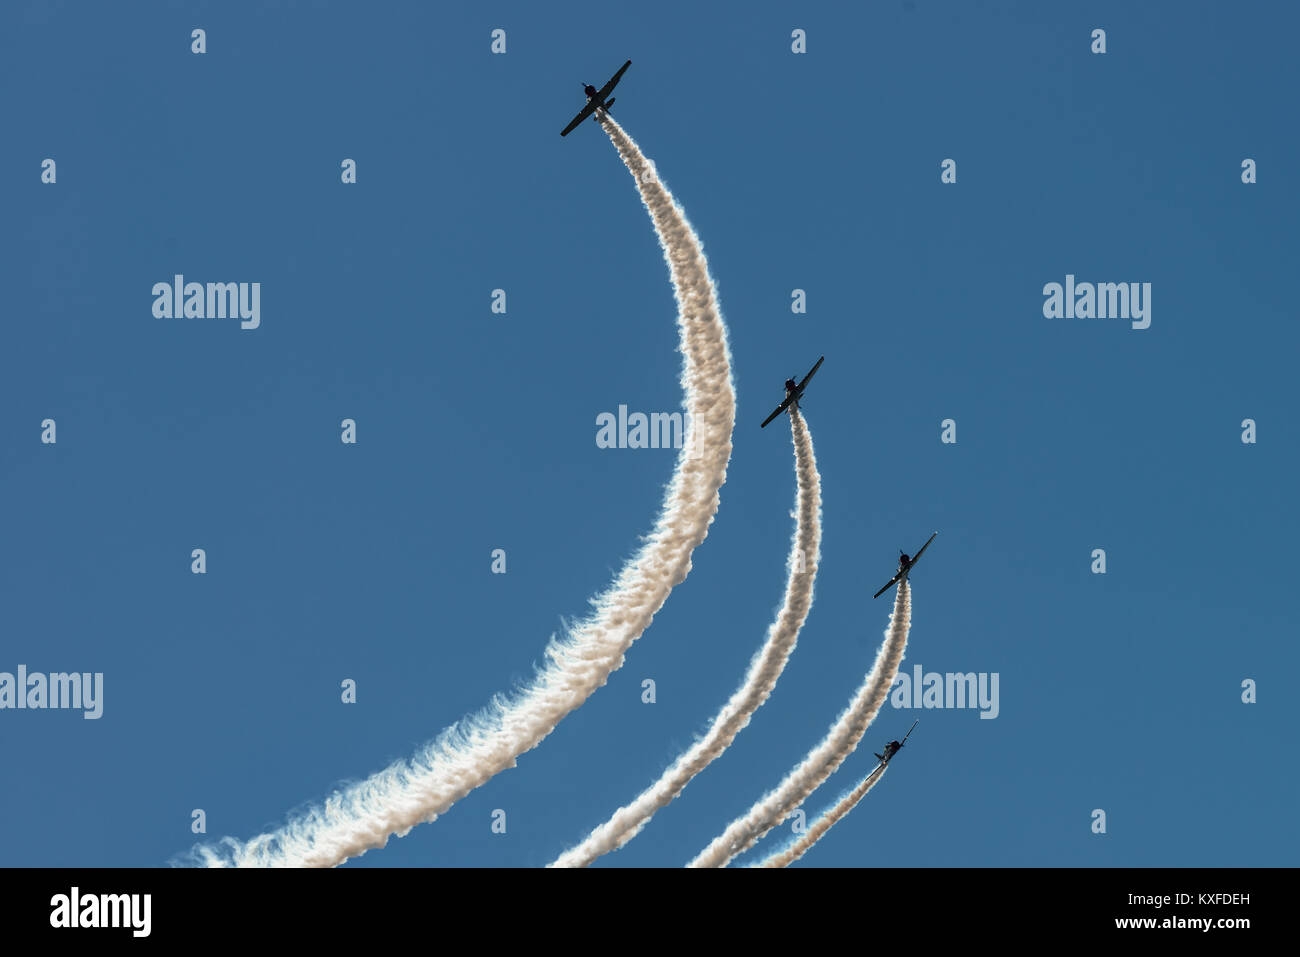 READING, PA - JUNE 3, 2017: The GEICO Skytypers in flight during World War II reenactment at Mid-Atlantic Air Museum Stock Photo